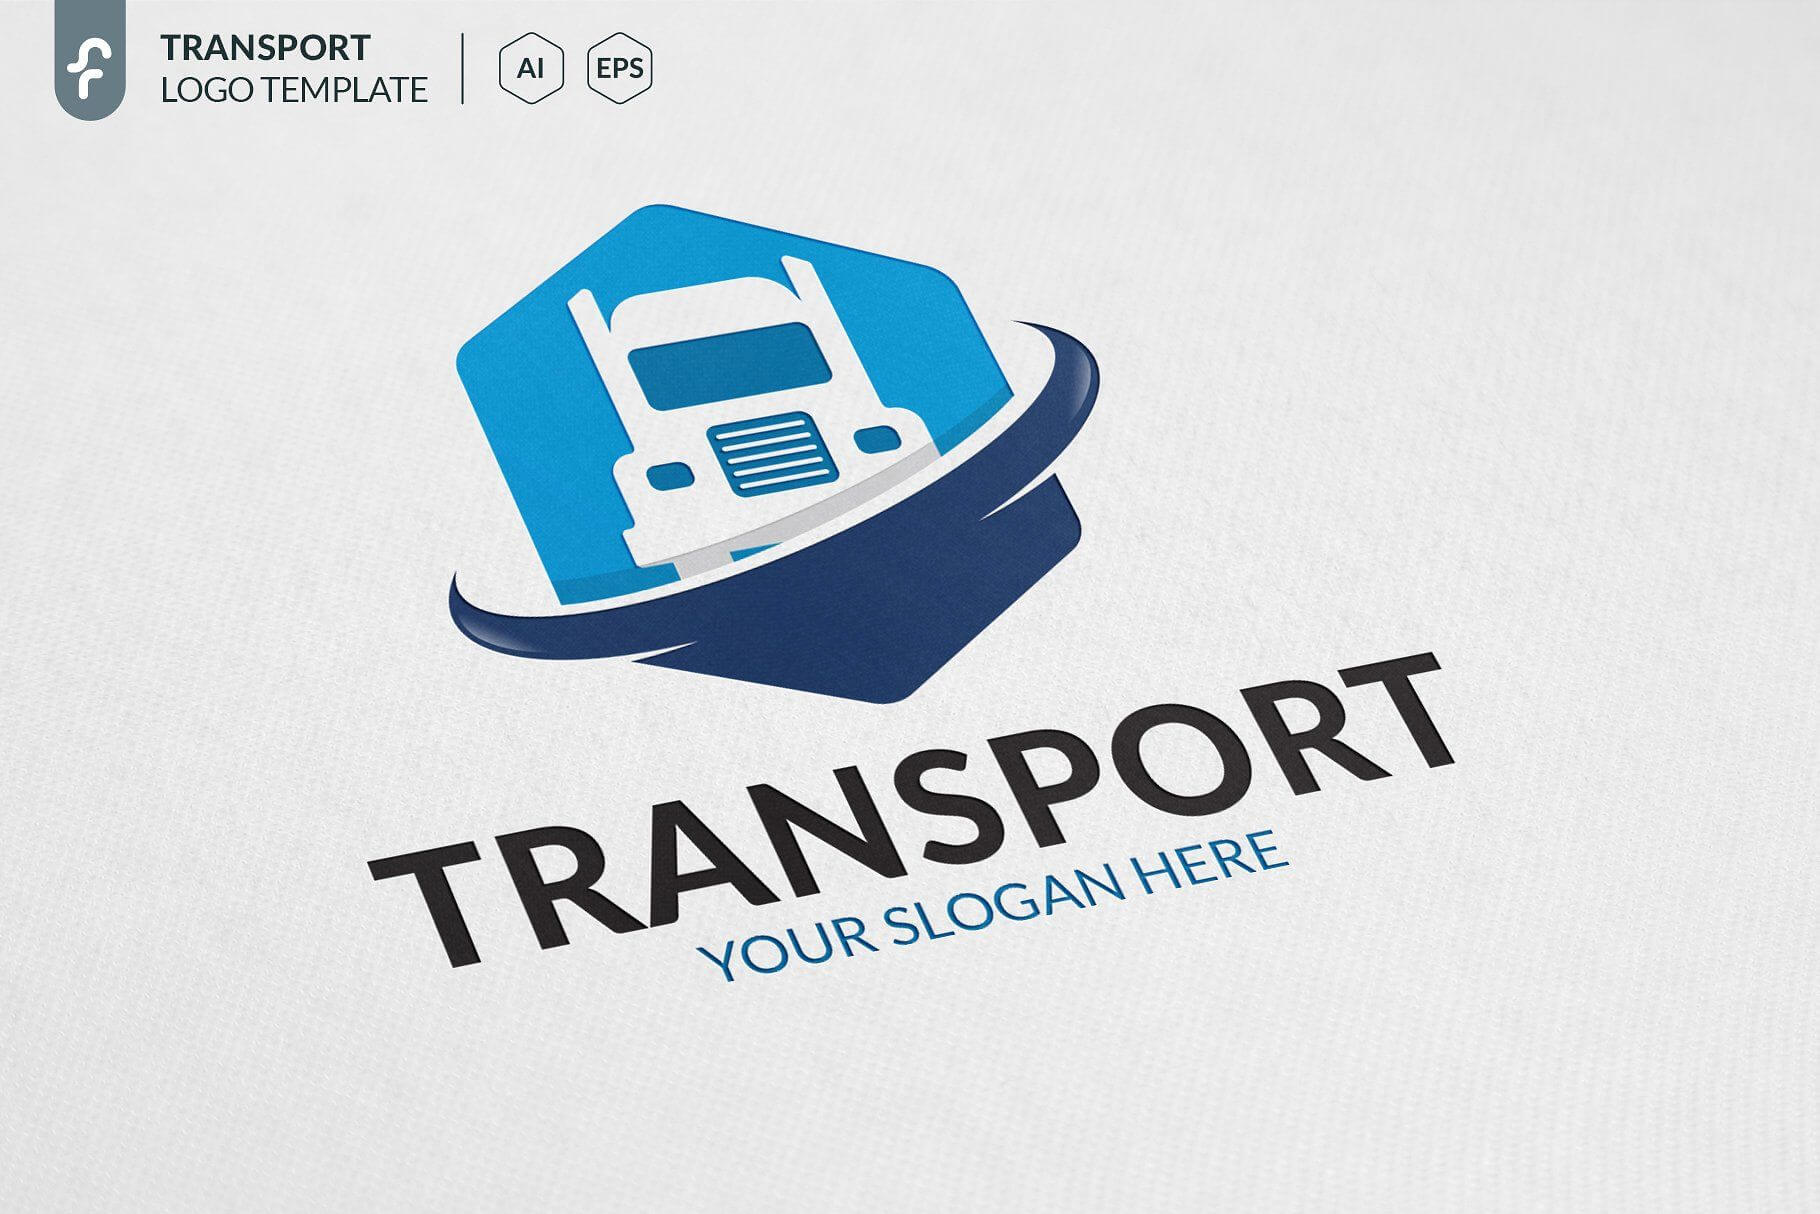 Transport Truck Logo #truck#transport#templates#logo | Free With Regard To Transport Business Cards Templates Free